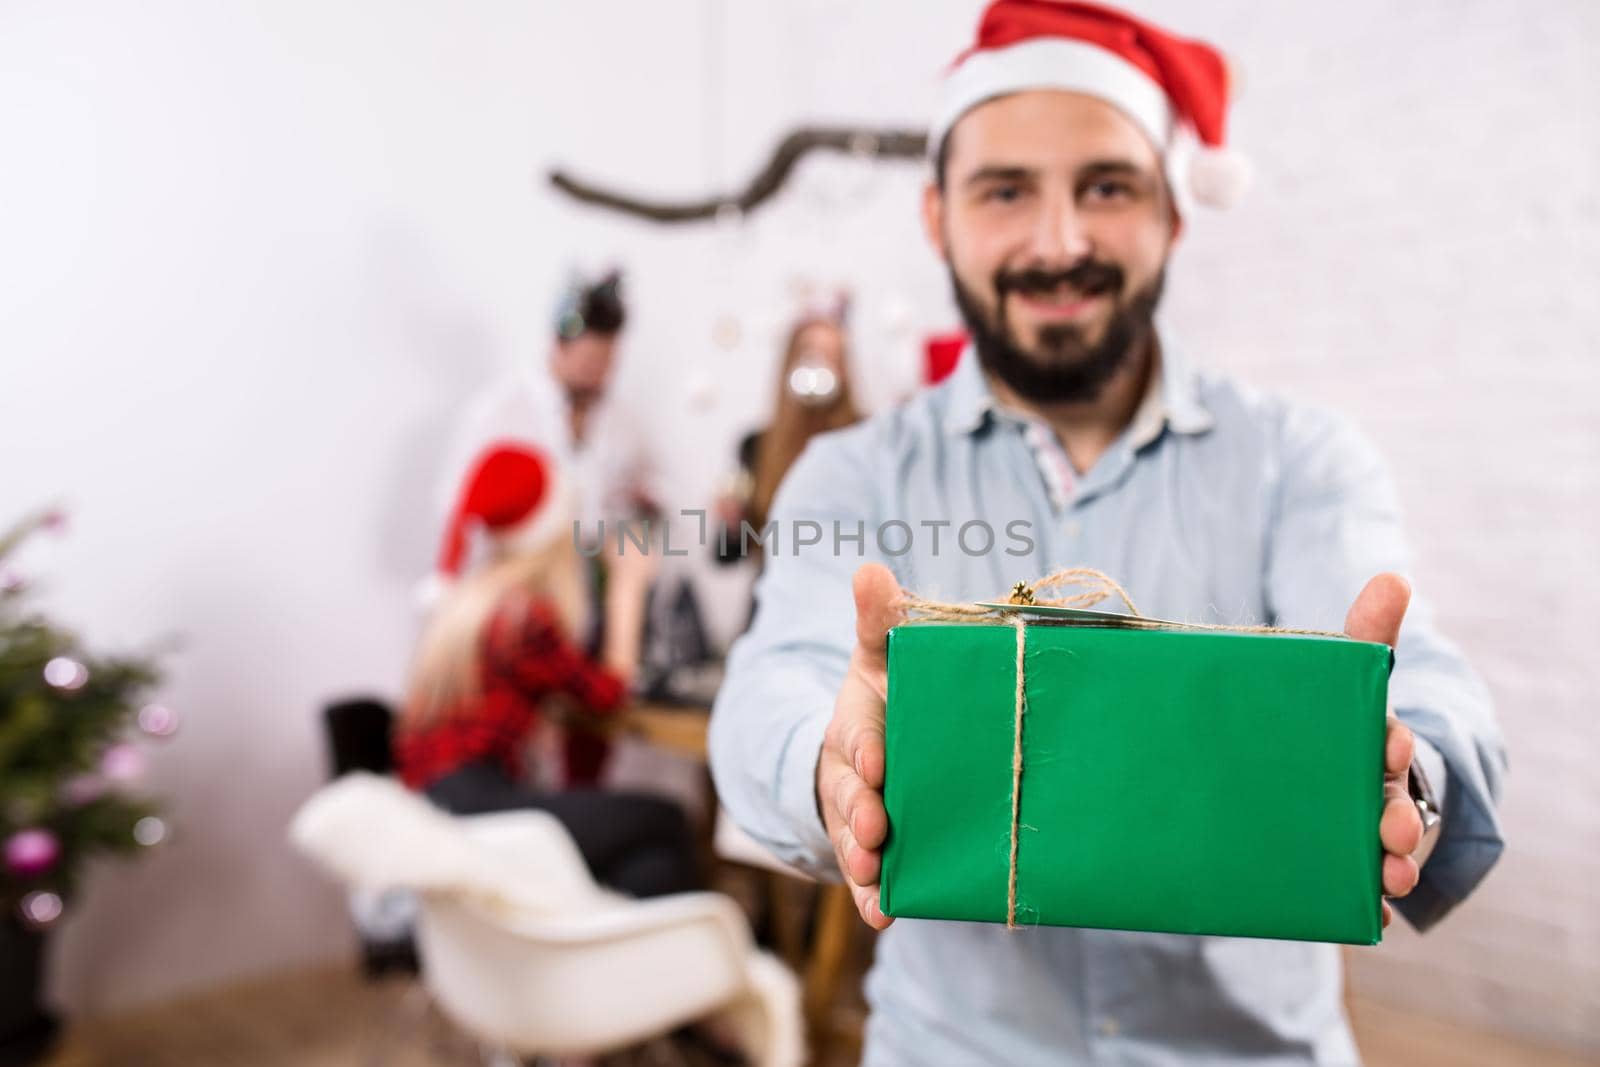 Shot of happy friends enjoying holidays. Focus on the man in the foreground in a red Christmas hat by nazarovsergey